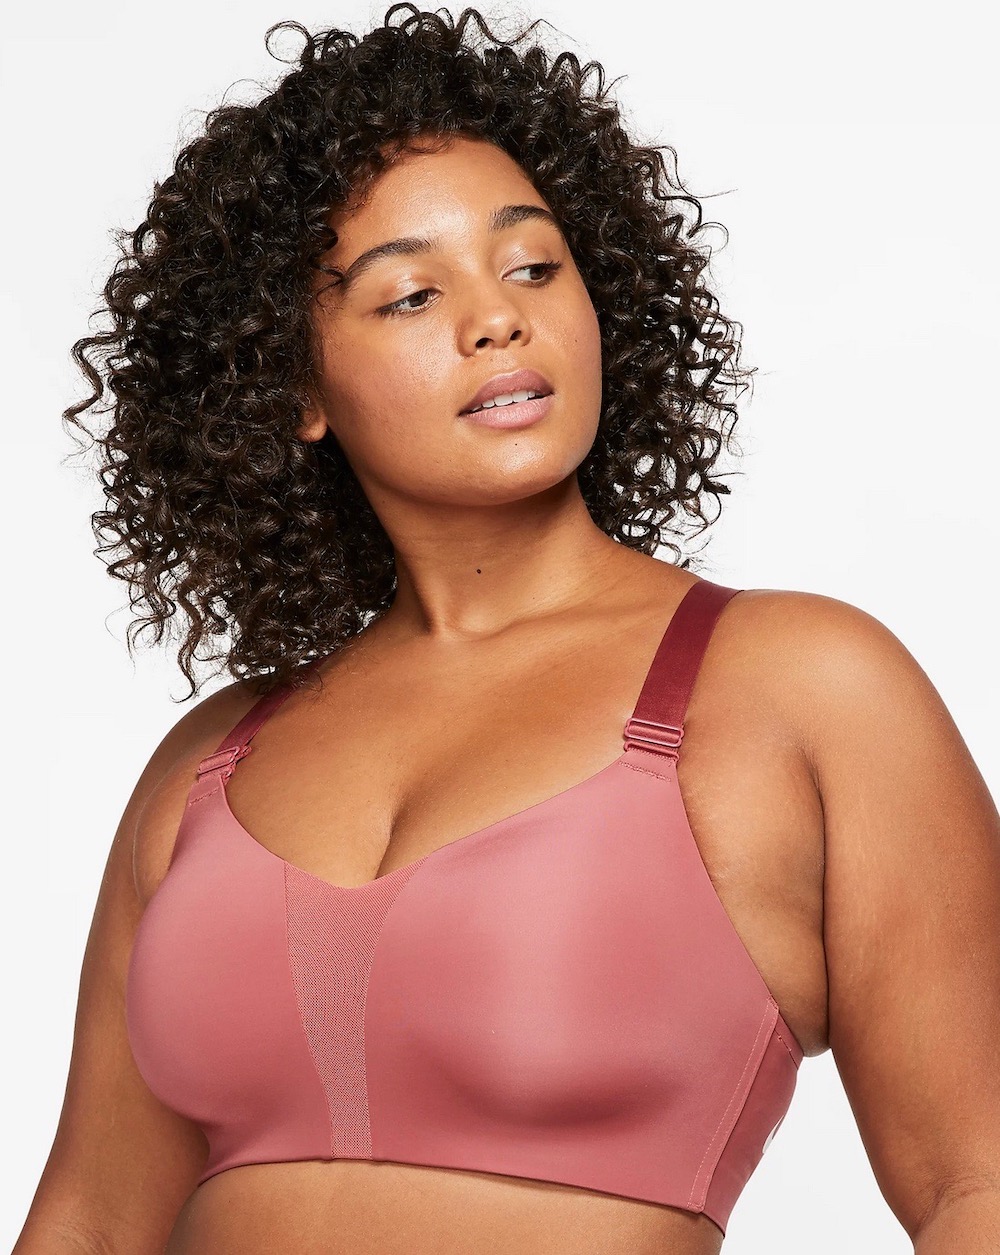 13 Sports Bras For Big Breasts That Are Functional And Fashionable Thefashionspot 